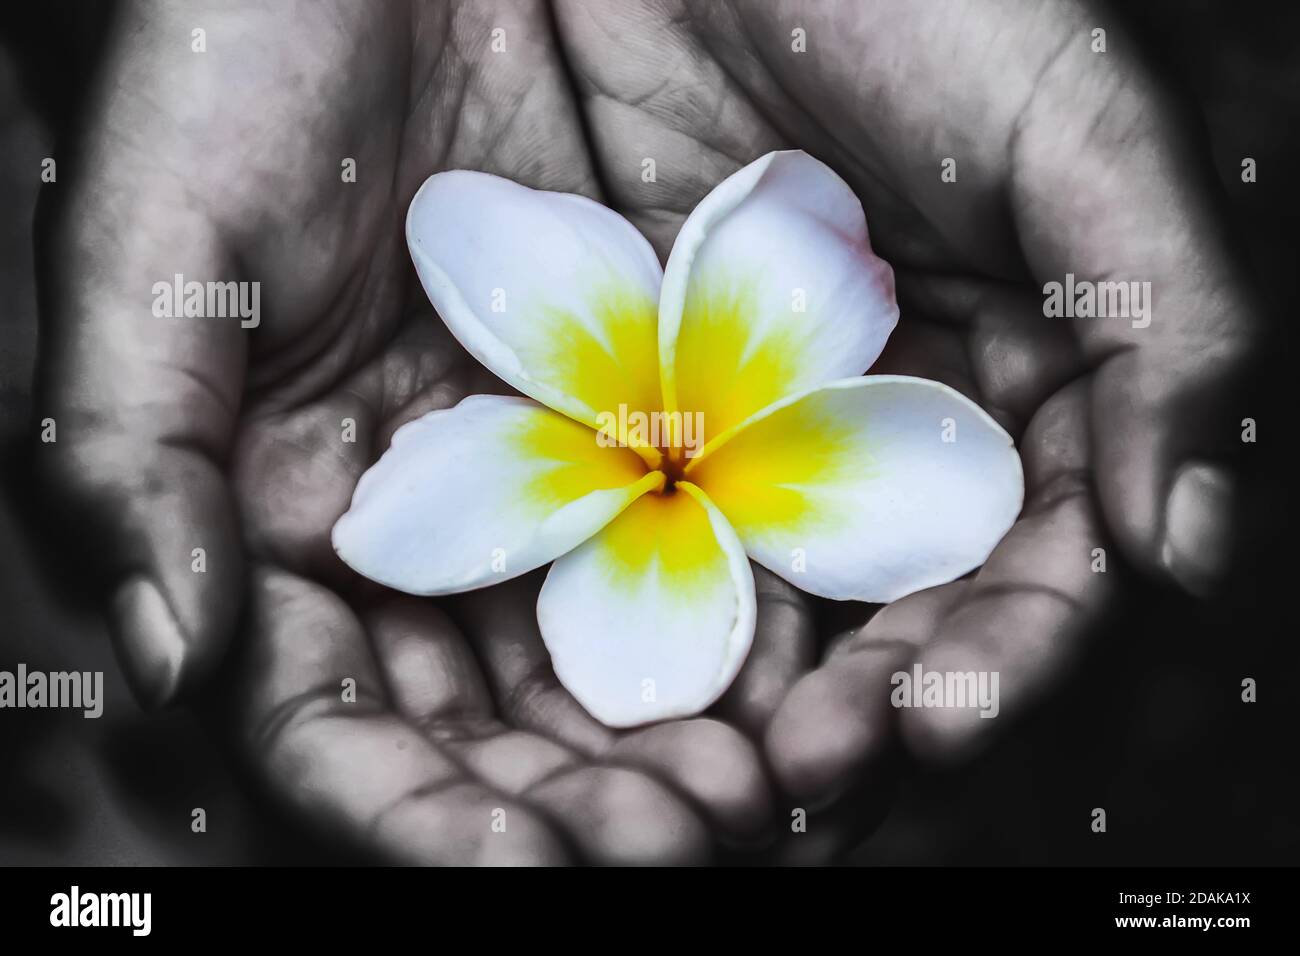 Champa flowers in the hands of childrenมIt is a picture of a child's hand that creates a black and white ridge and flowers in color. Stock Photo